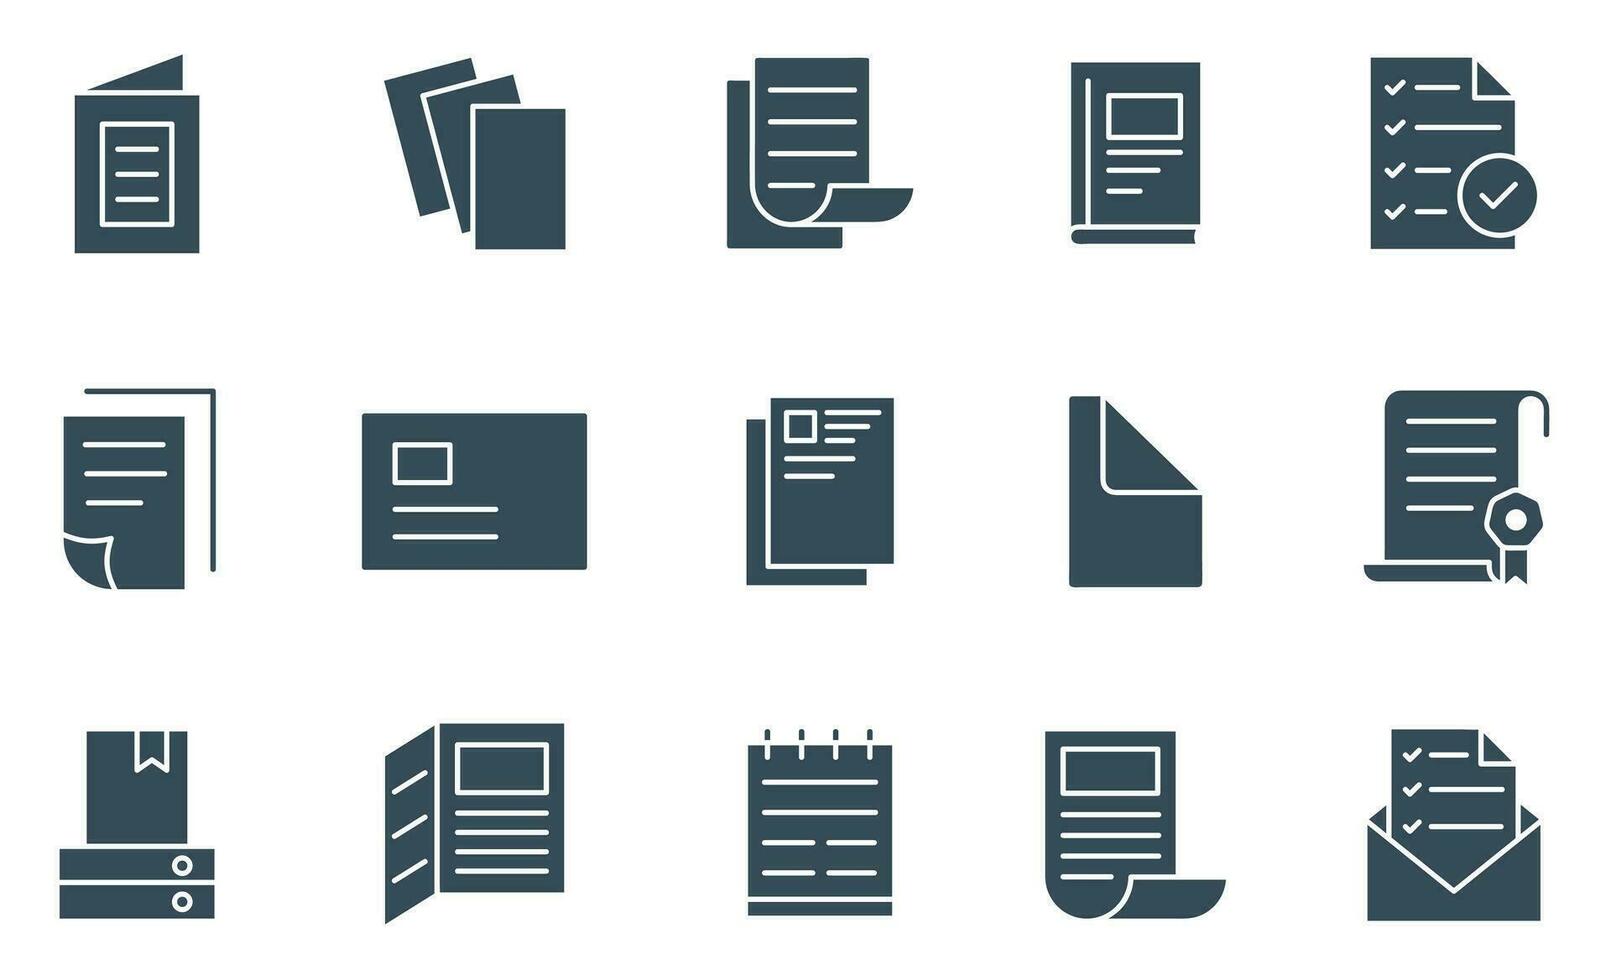 File document line icon set. collection of paper and files, management icons vector illustration